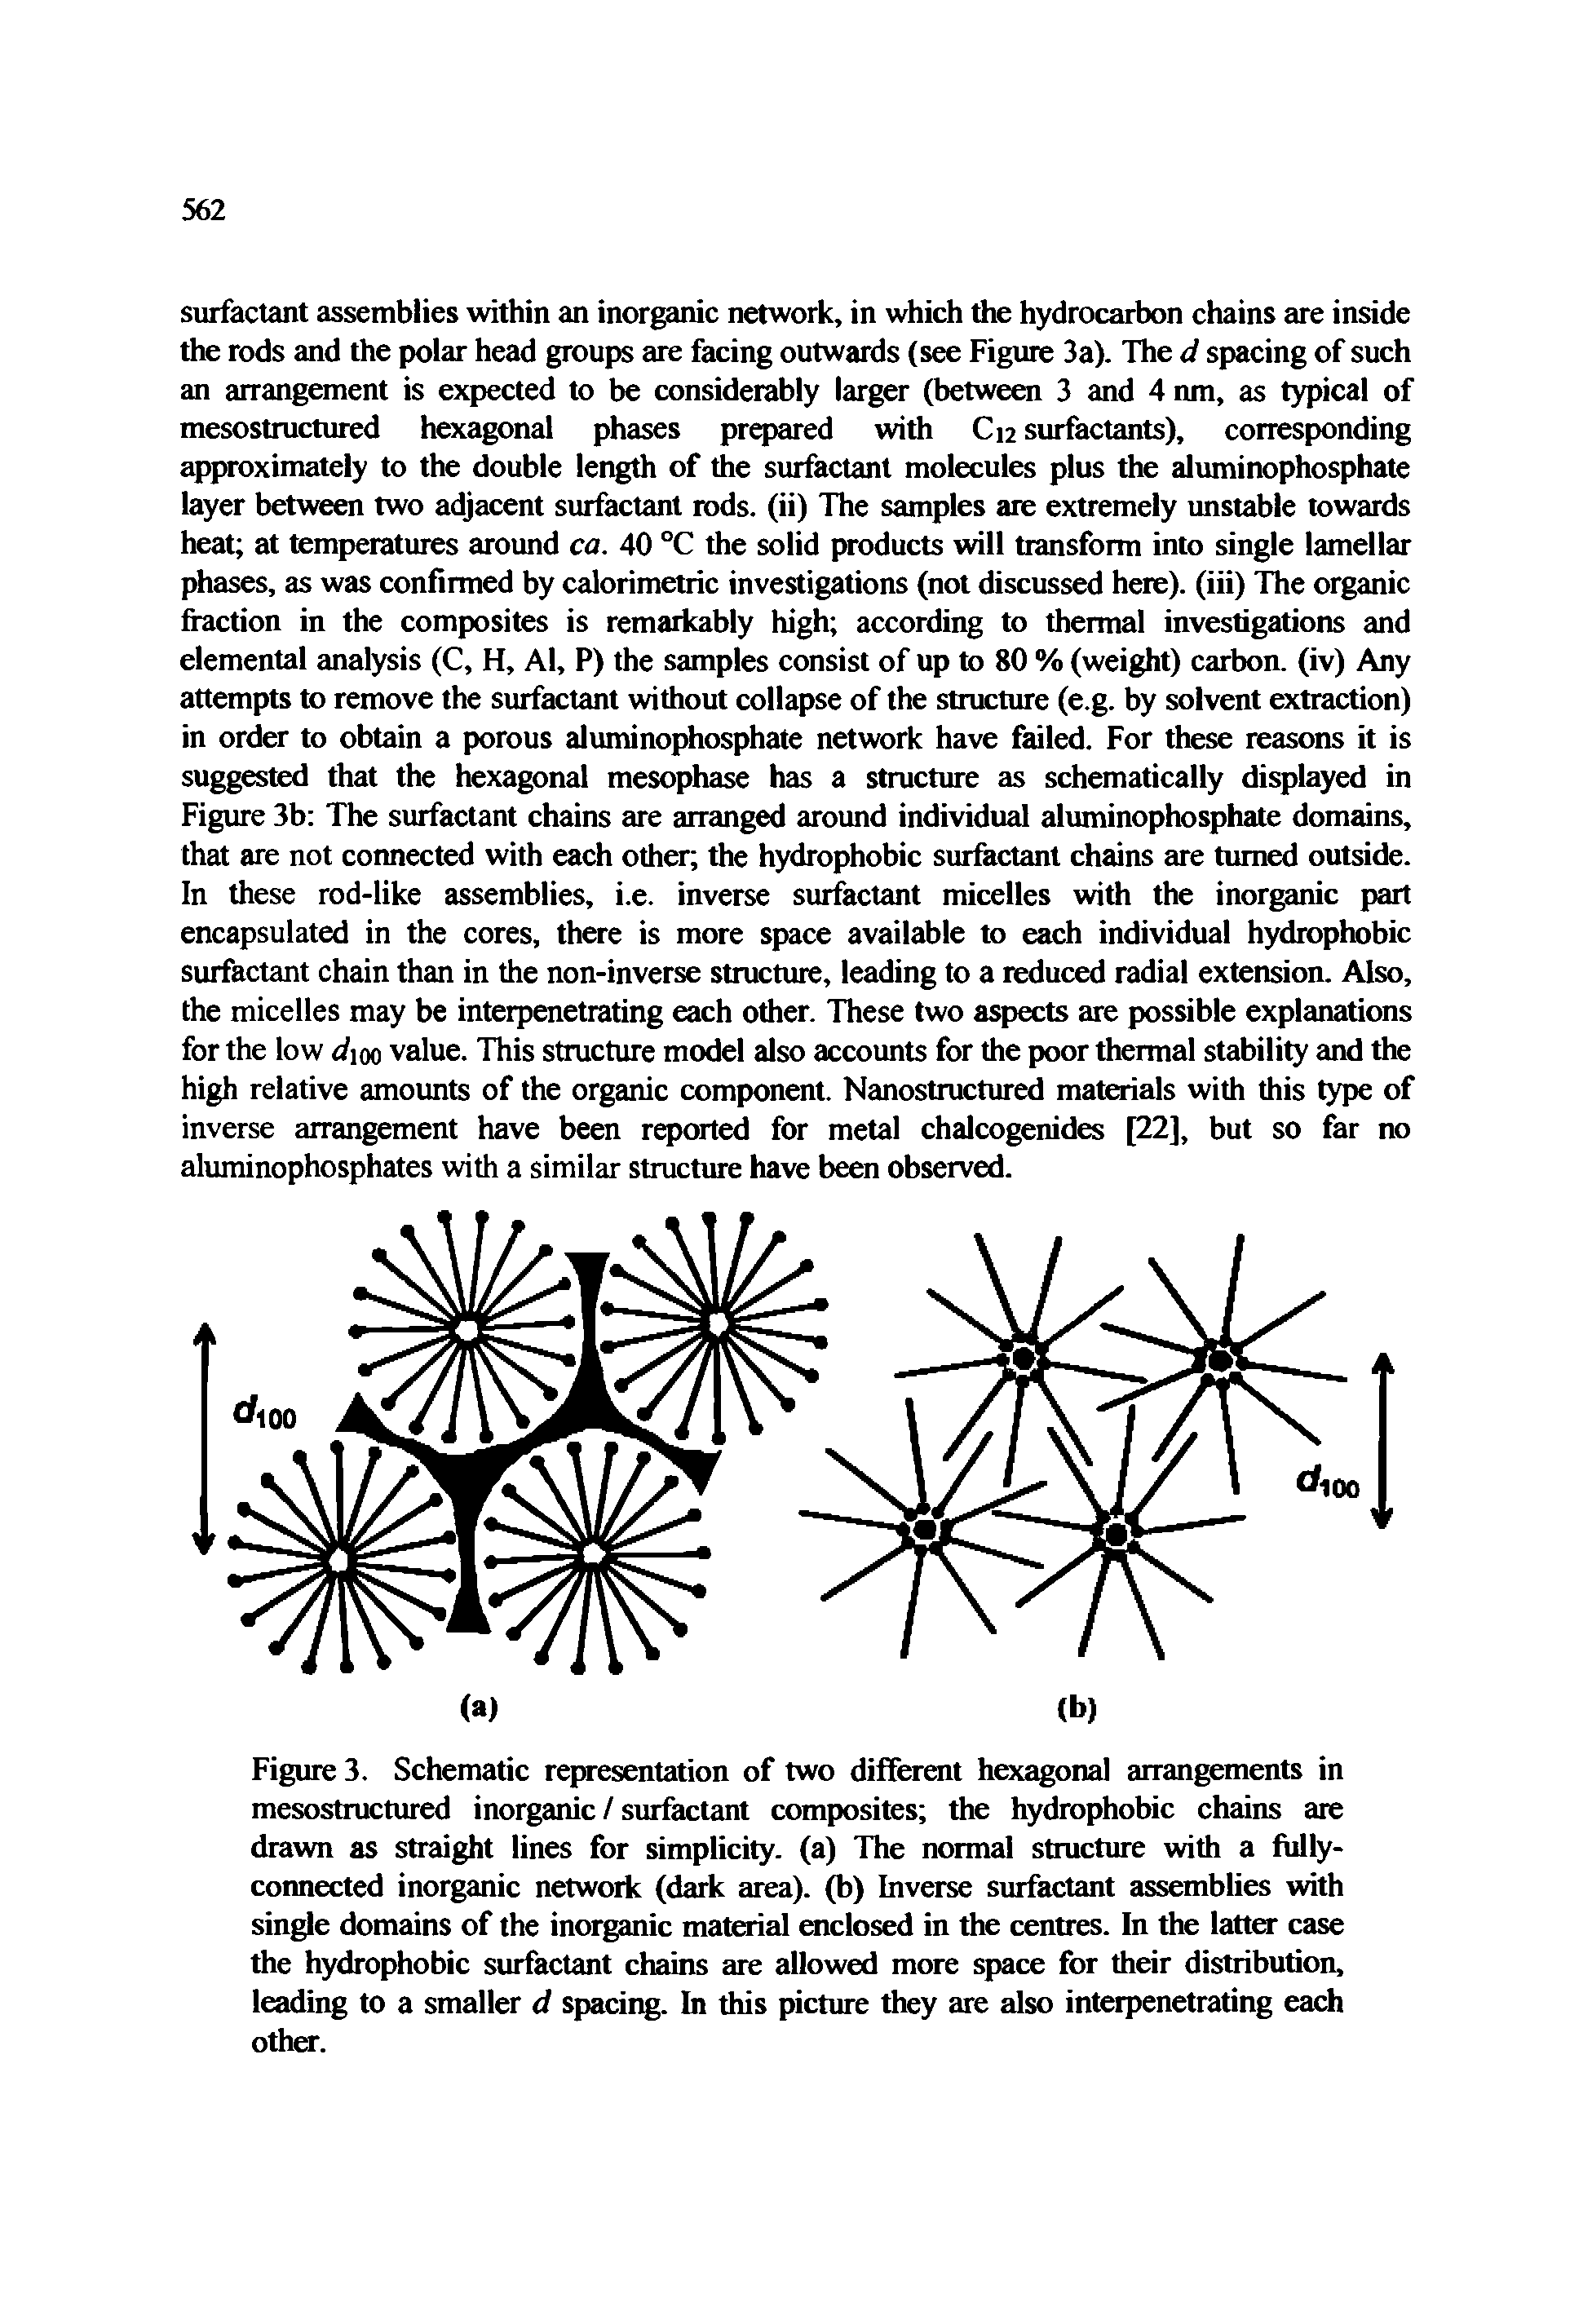 Figure 3. Schematic representation of two different hexagonal arrangements in mesostructured inorganic / surfactant composites the hydrophobic chains are drawn as straight lines for simplicity, (a) The normal structure with a fully-connected inorganic network (dark area), (b) Inverse surfactant assemblies with single domains of the inorganic material enclosed in the centres. In the latter case the hydrophobic surfactant chains are allowed more space for their distribution, leading to a smaller d spacing. In this picture they are also interpenetrating each other.